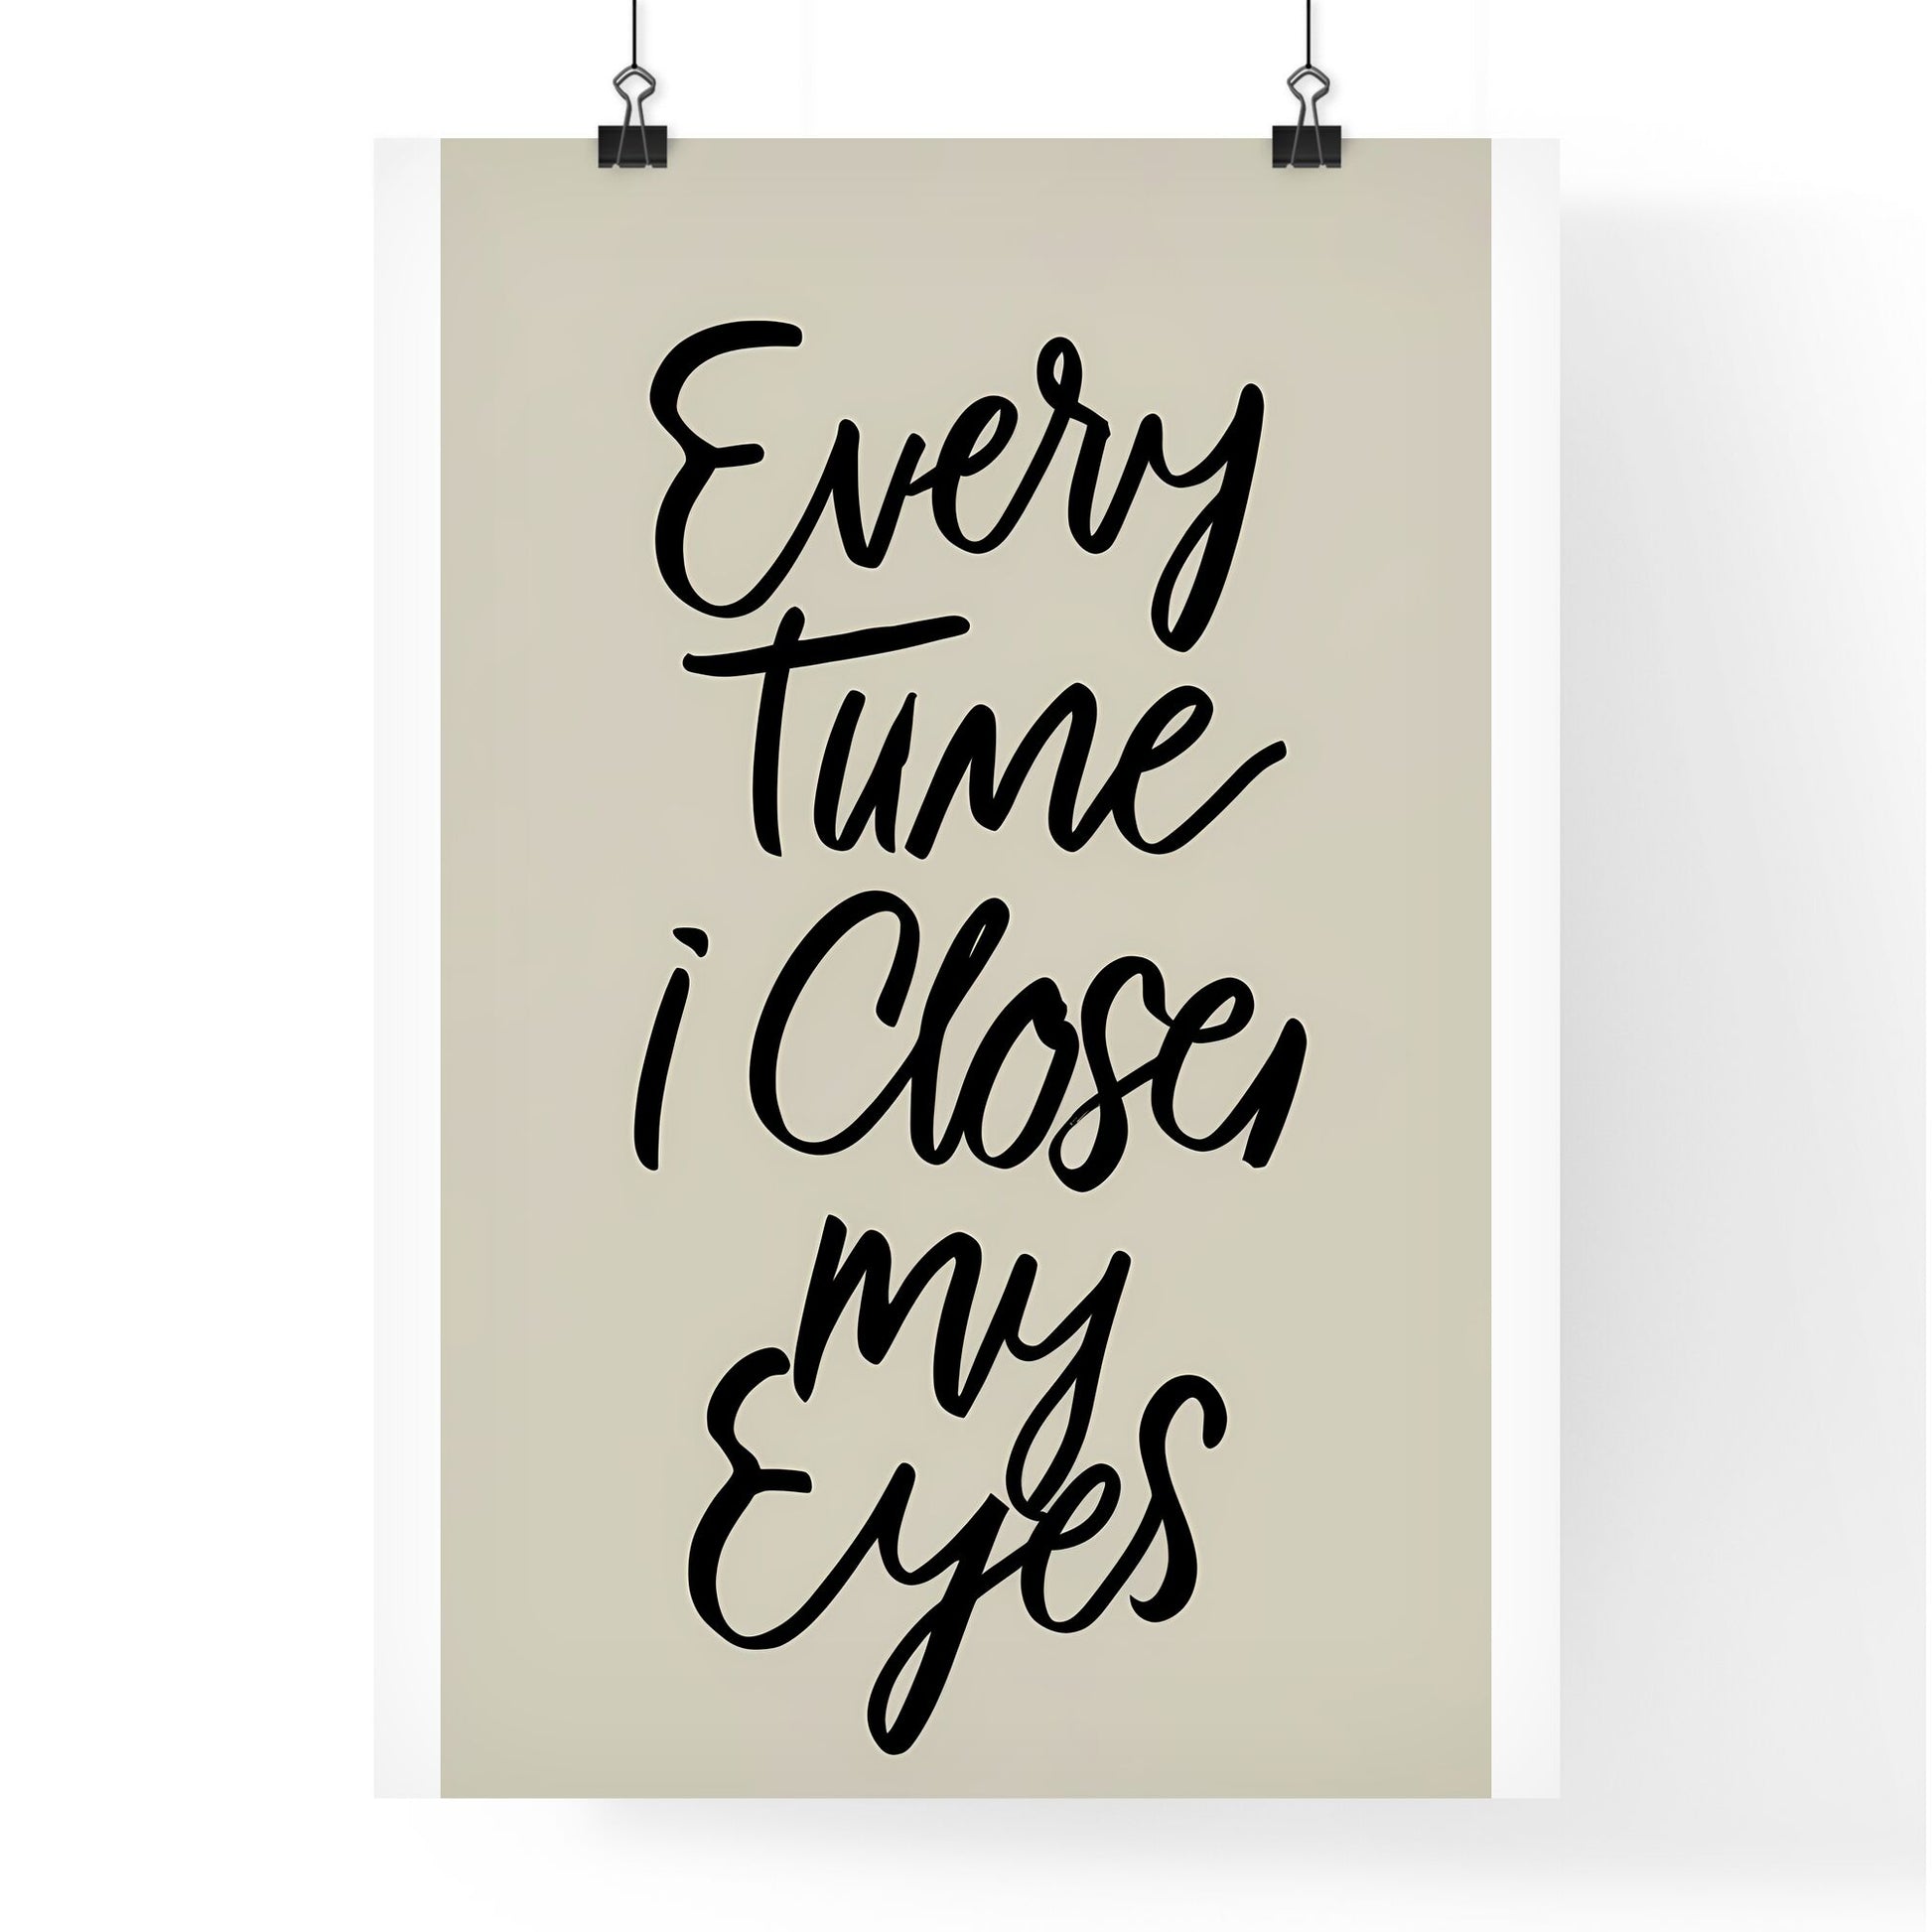 Every Time I Close My Eyes - A White Sign With Black Text Art Print Default Title